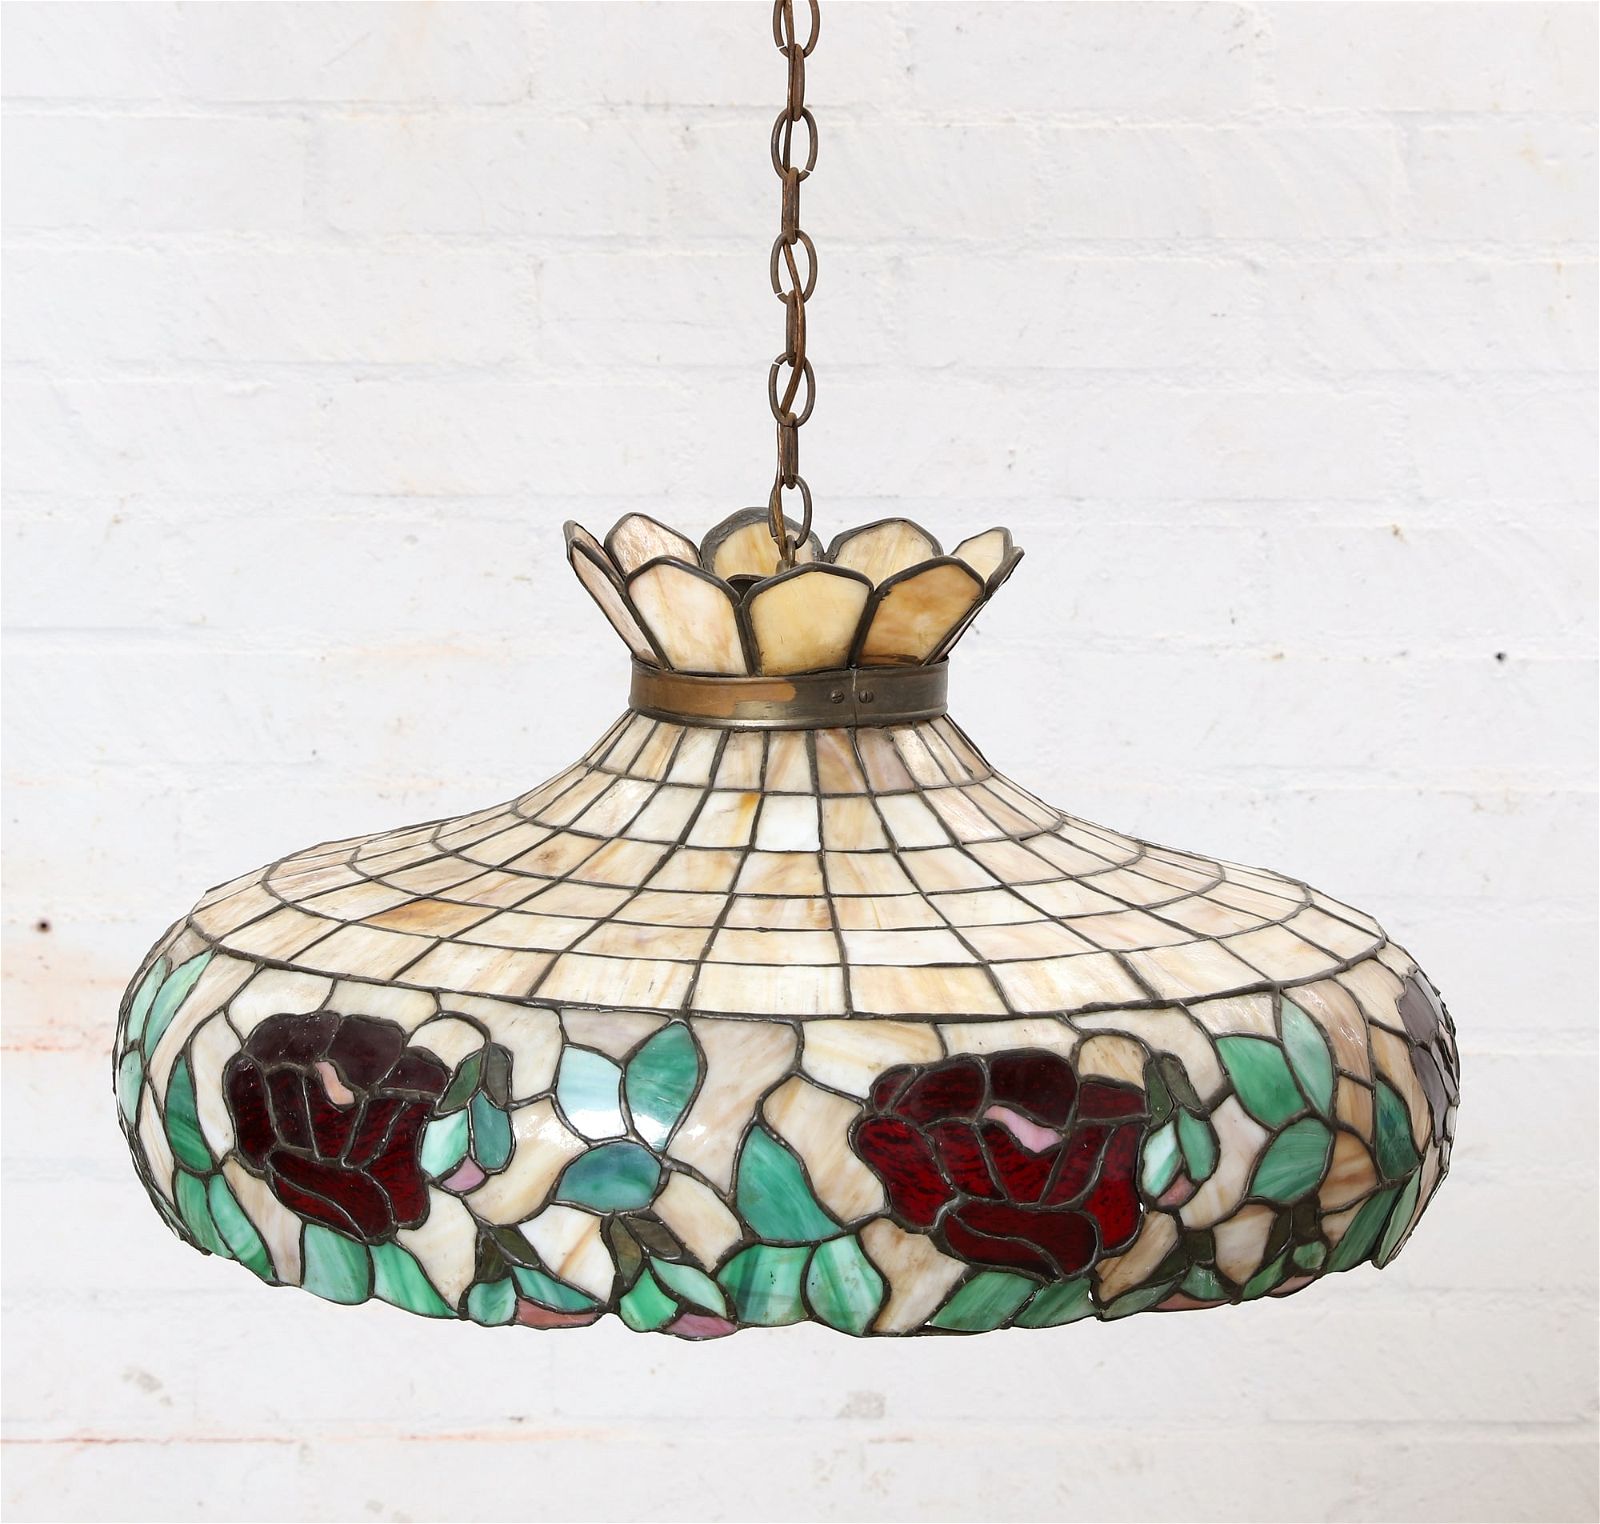 A LEADED SLAG GLASS FLORAL BAND HANGING